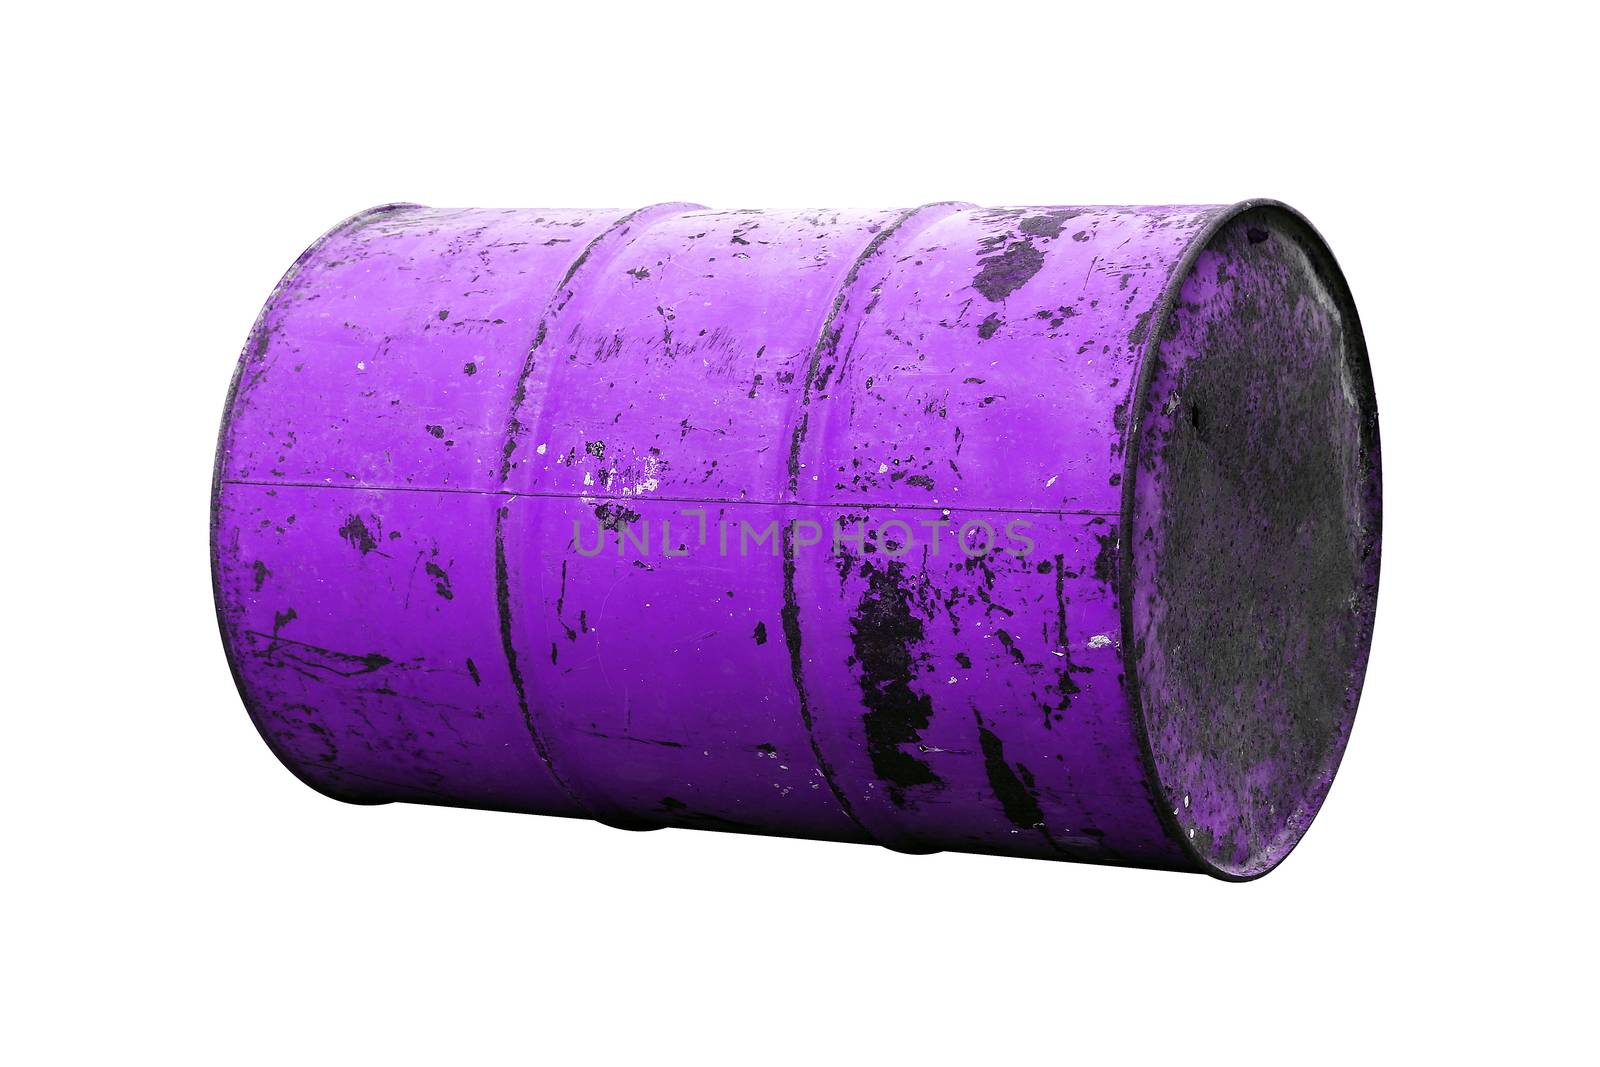 Barrel Oil purple Old isolated on background white